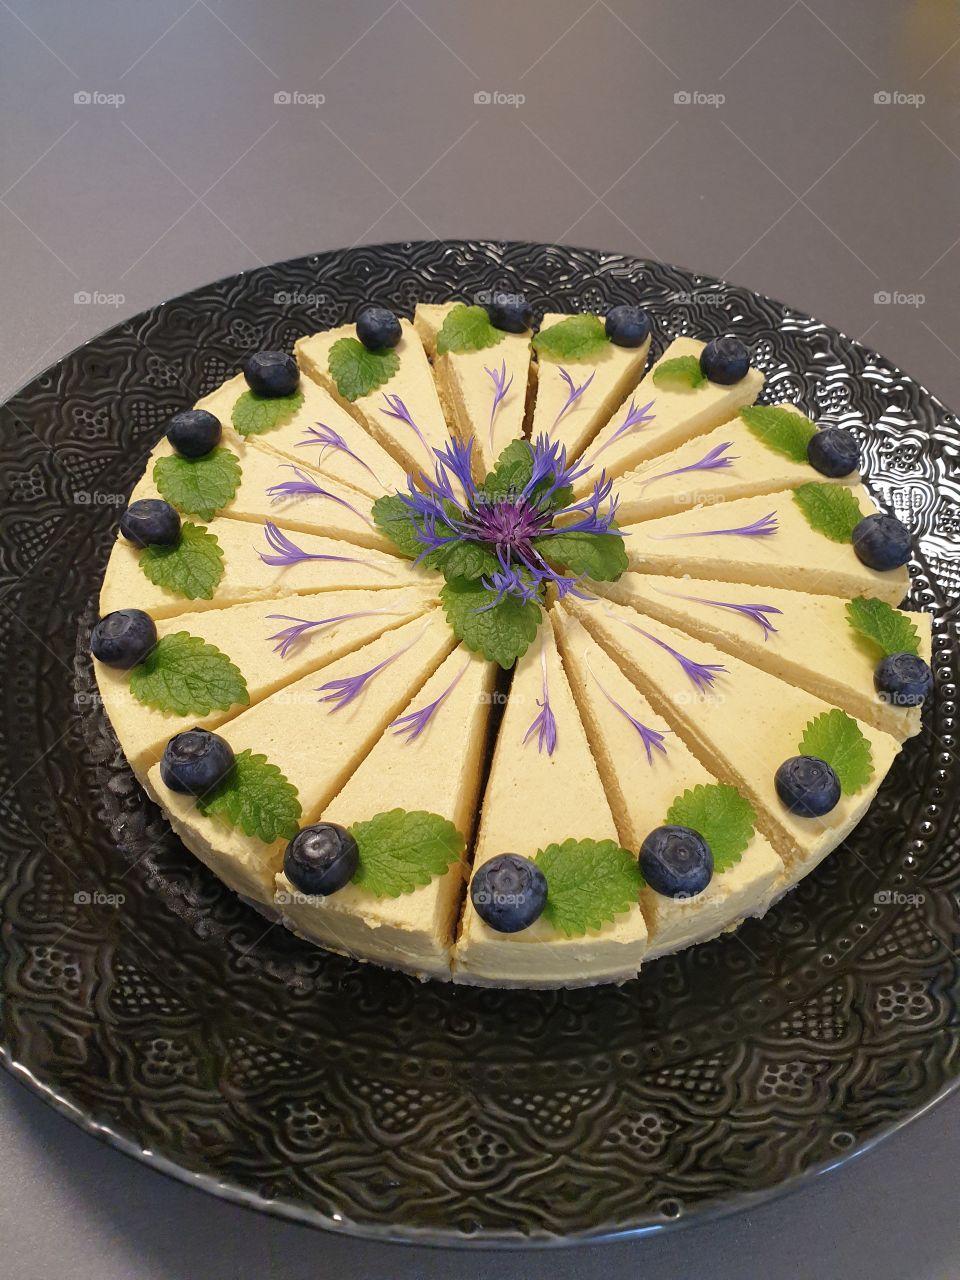 Raw vegan cake decorated with bluberries and flowers.